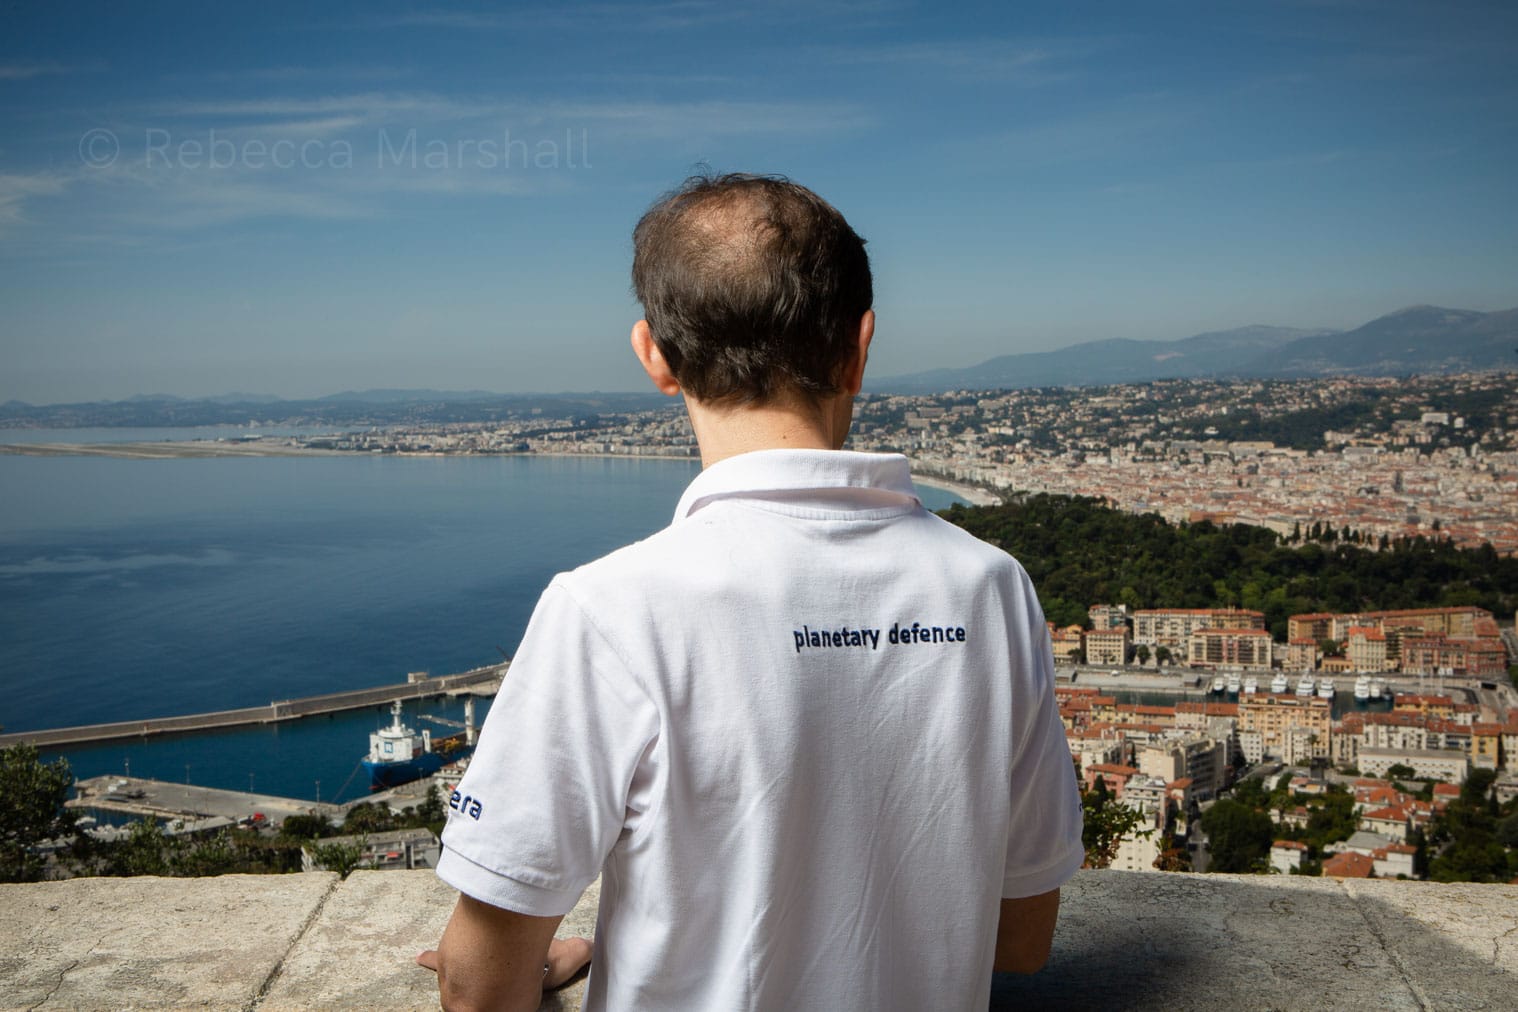 A man with his back to the camera, in a white T-shirt with 'planetary defence' printed on the back, looks down from a viewpoint over the coastal city of Nice